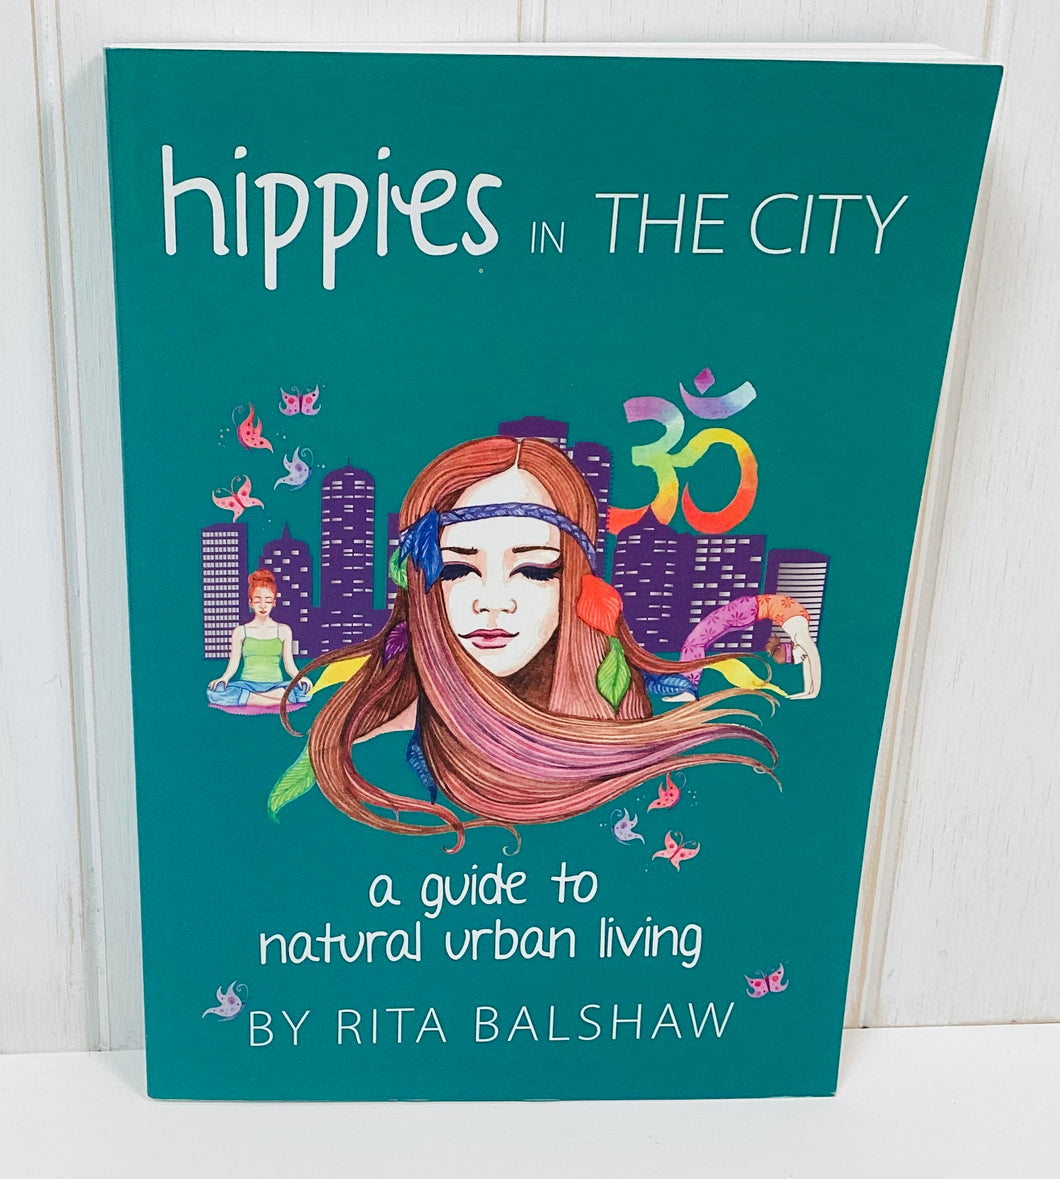 Hippies in the City Urban Living Guide by Rita Balshaw